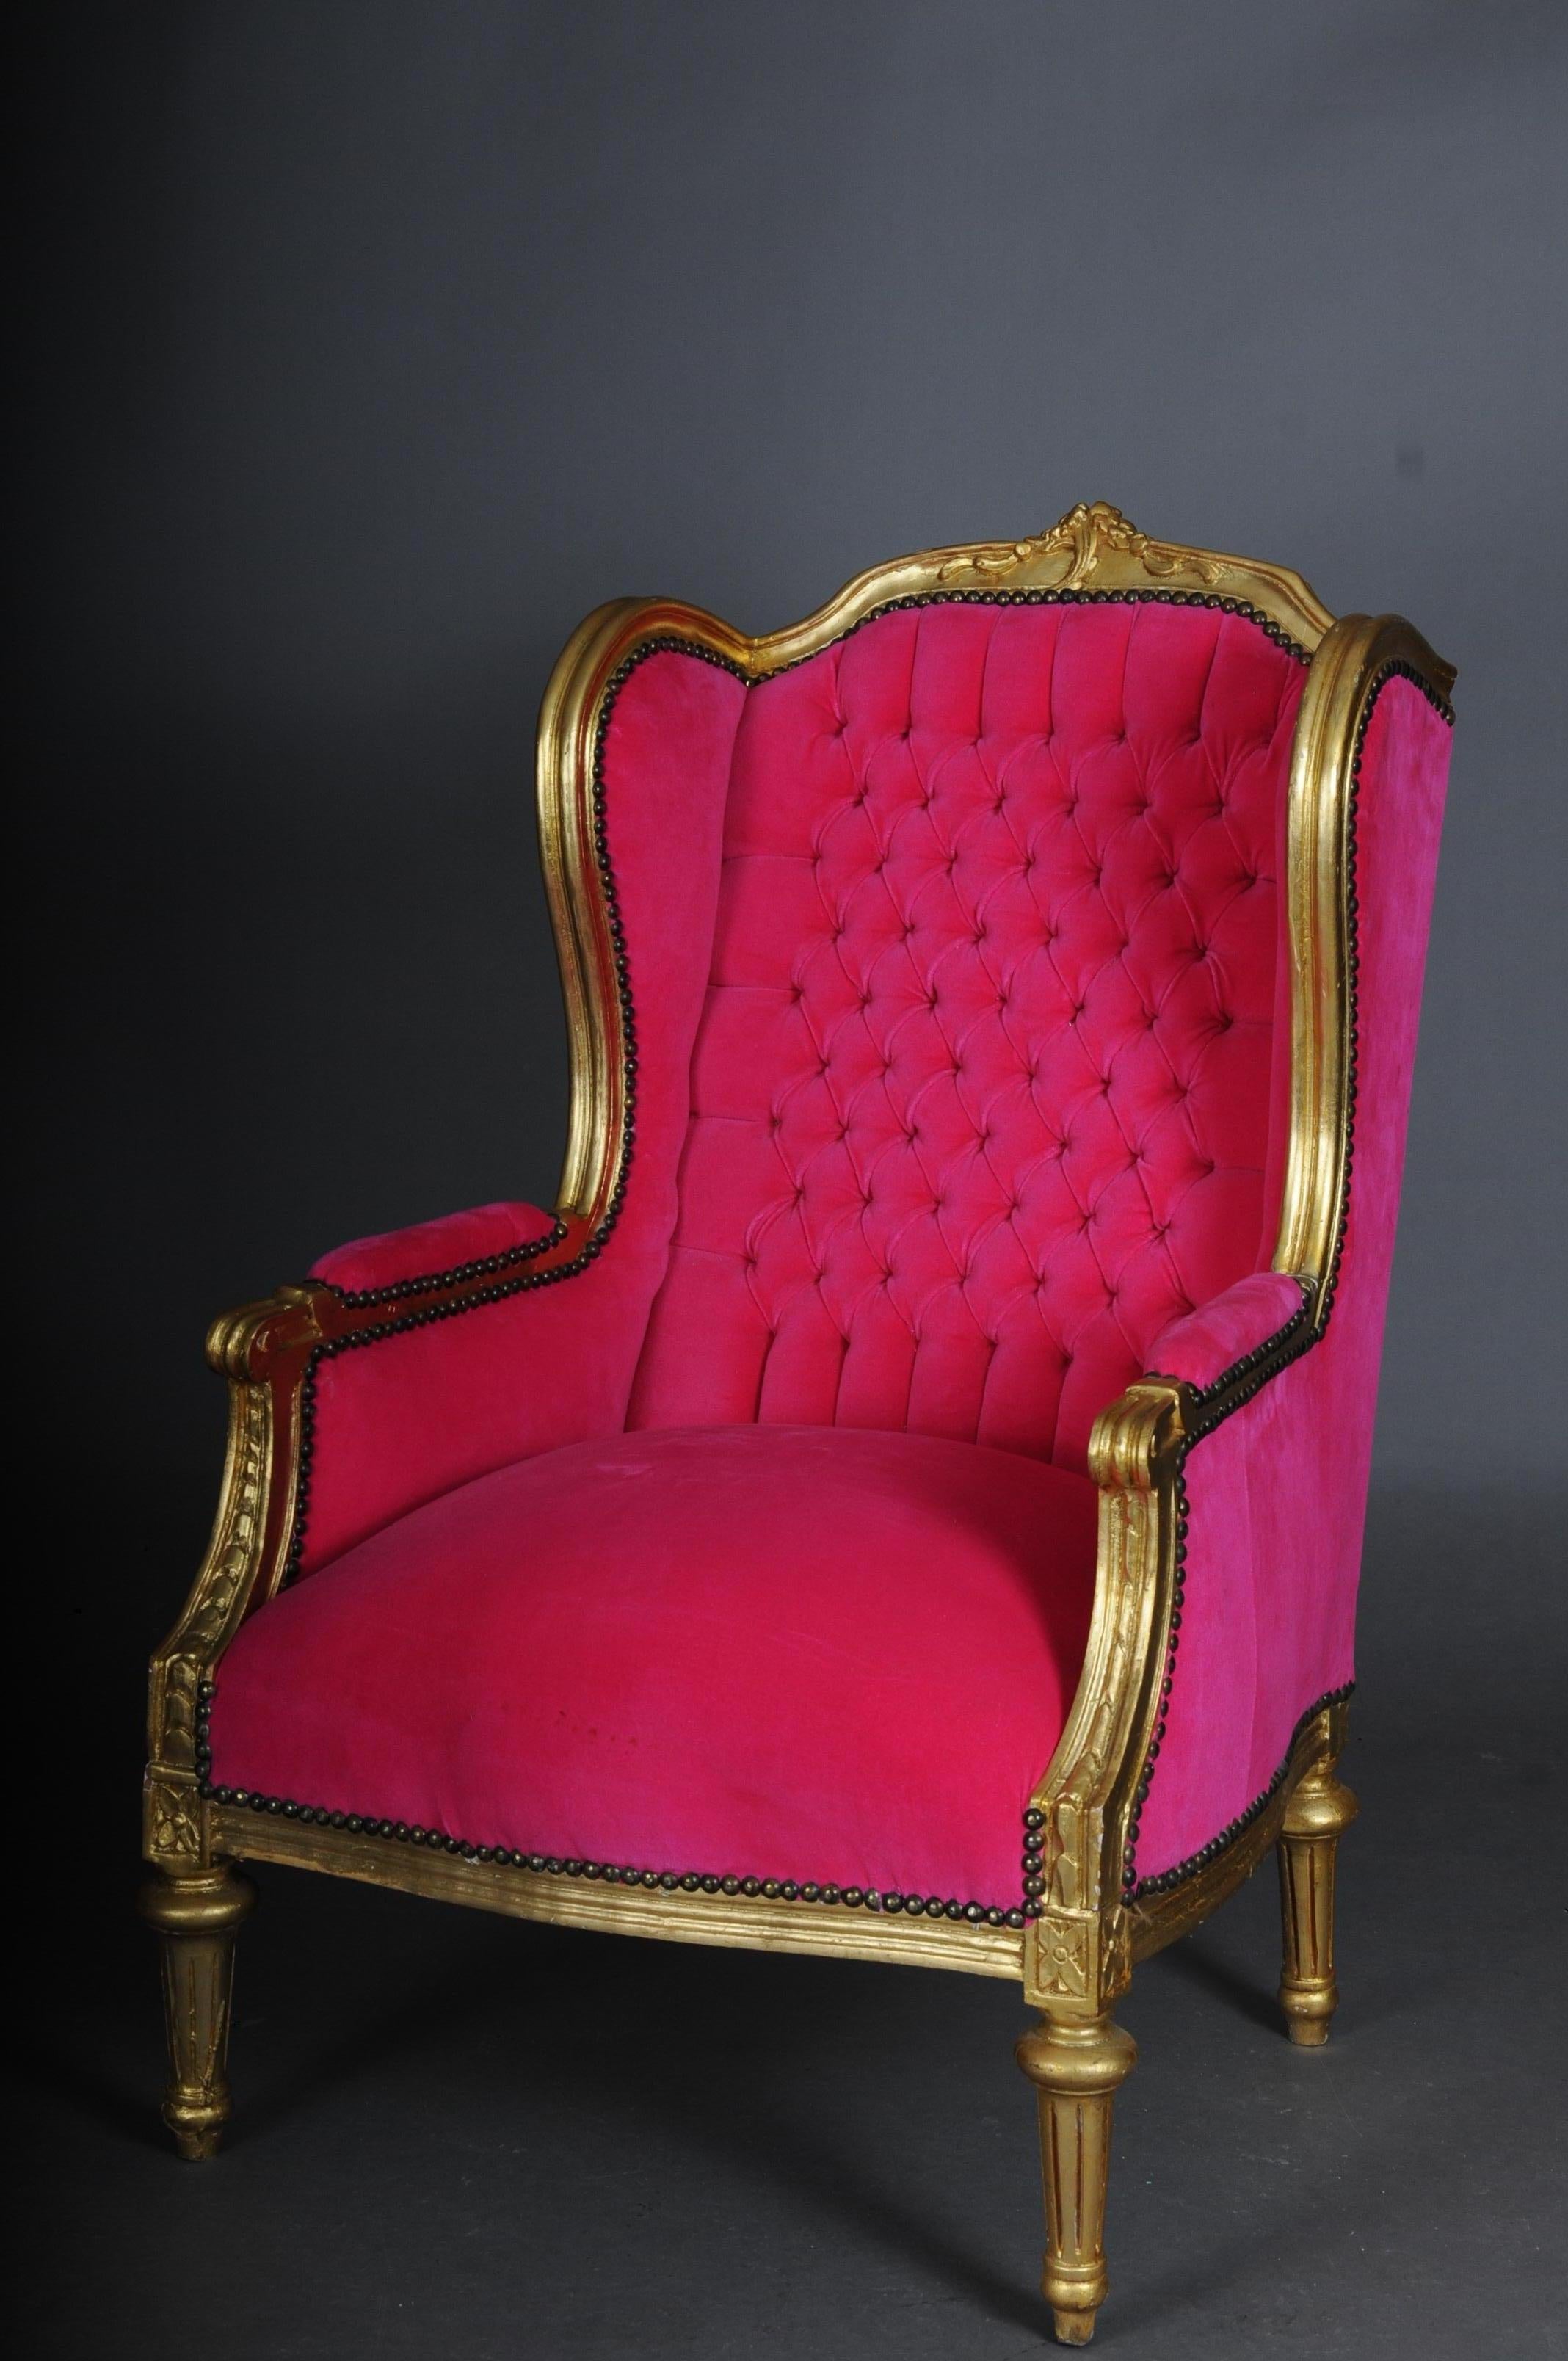 Gilt French Wing Chair Louis XVI, Pink Velvet Fabric